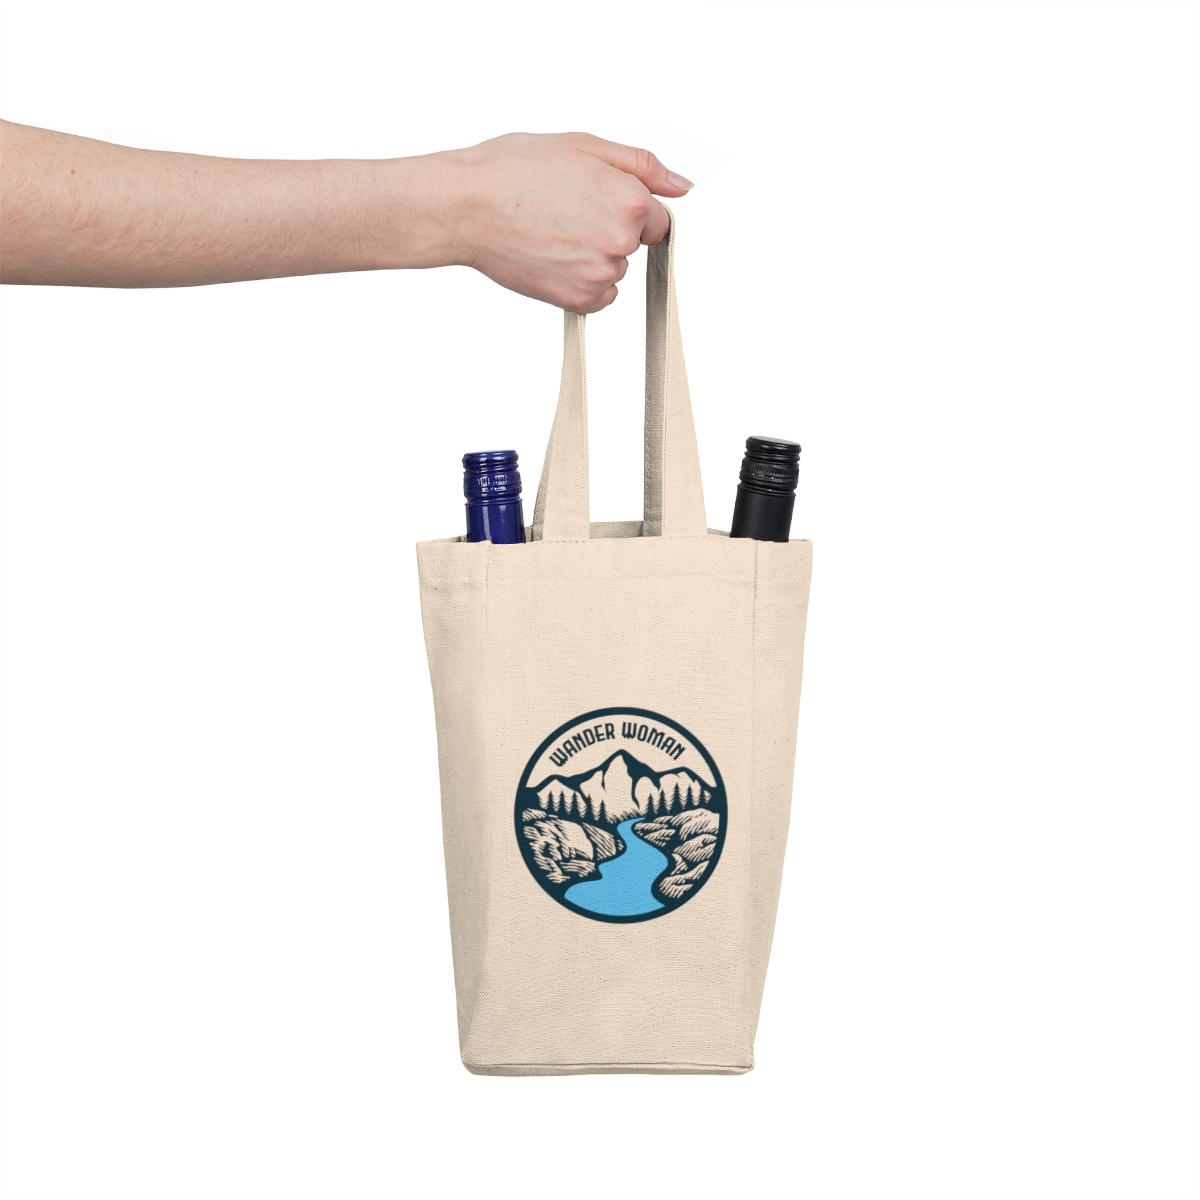 Primary image for Wander Woman Wine Tote Bag: Blue Mountain Graphic, 100% Cotton Canvas, Holds Two